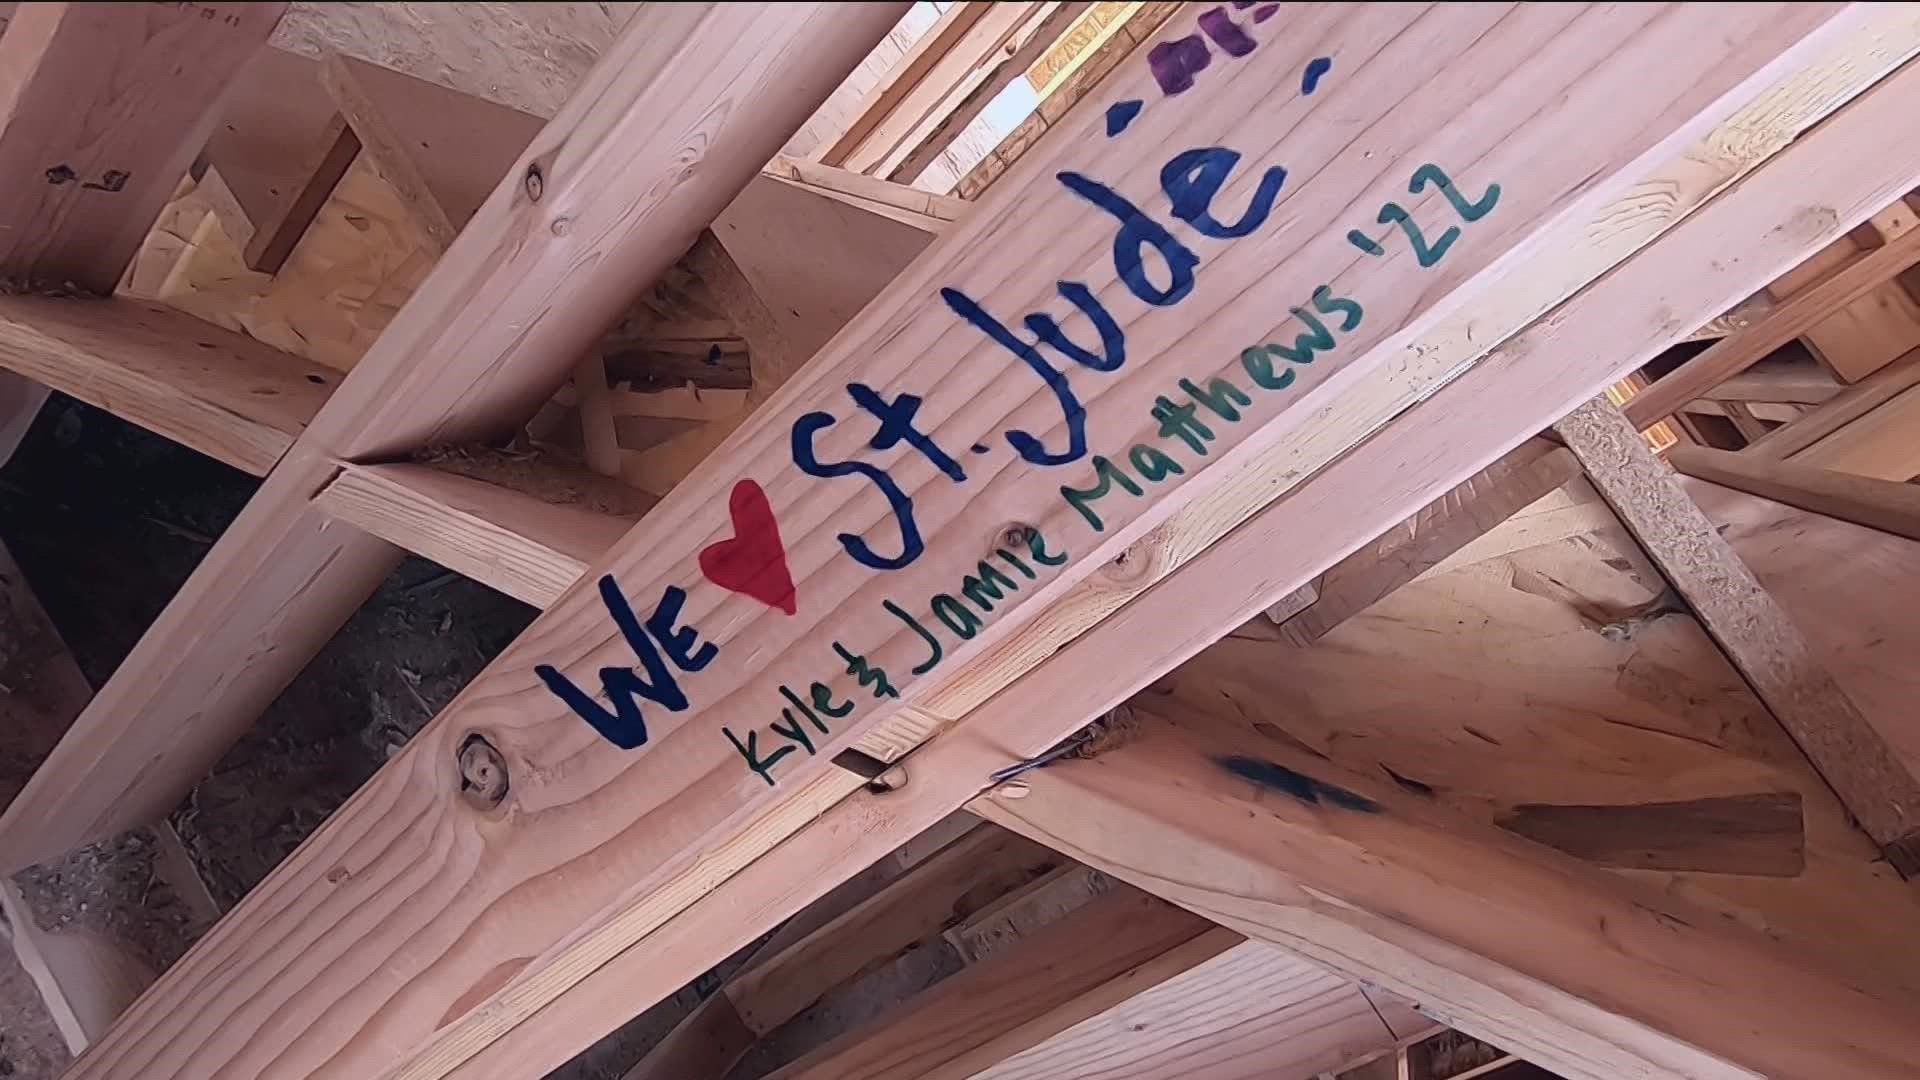 Some of the boards in the house were signed by people who donated to St. Jude Children's Research Hospital. Tickets for the Dream Home giveaway go on sale in April.